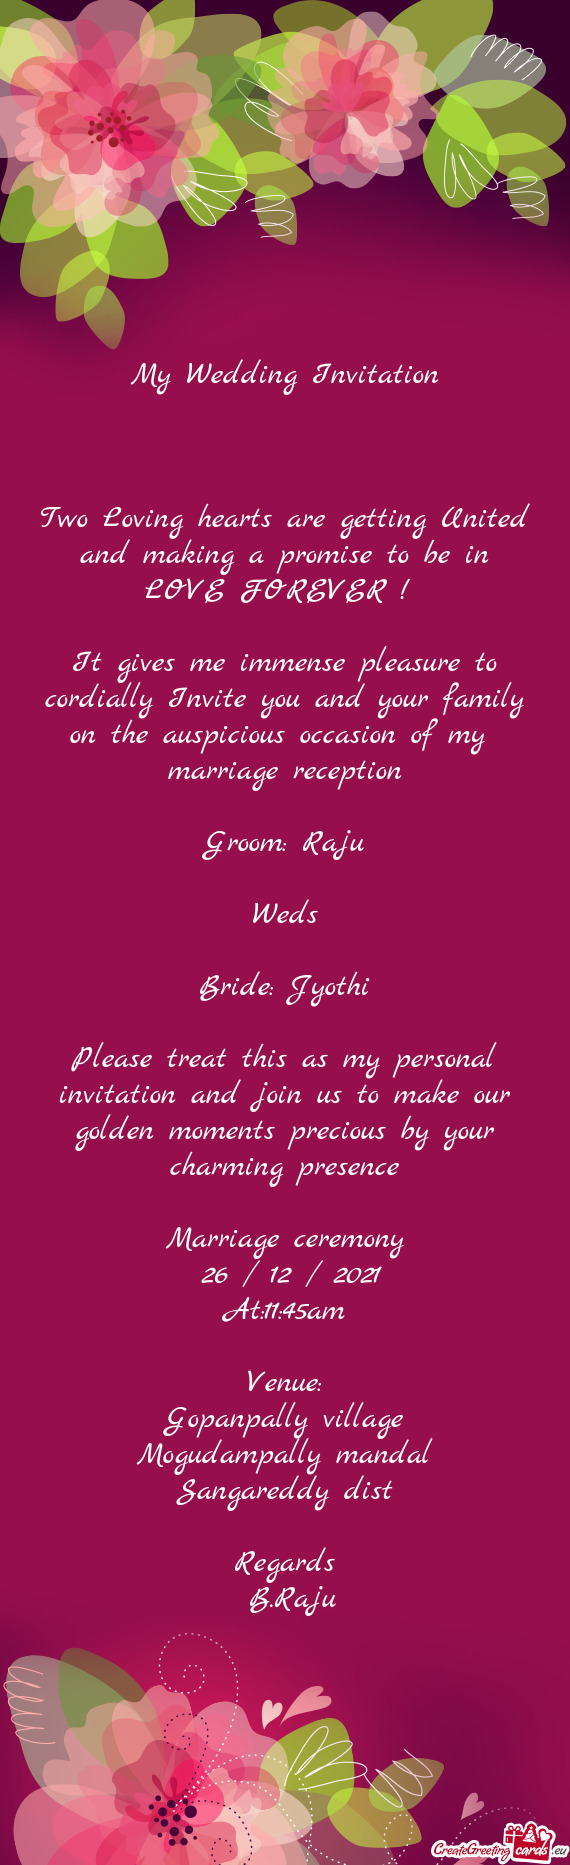 My Wedding Invitation
 
 
 
 Two Loving hearts are getting United and making a promise to be in LOVE